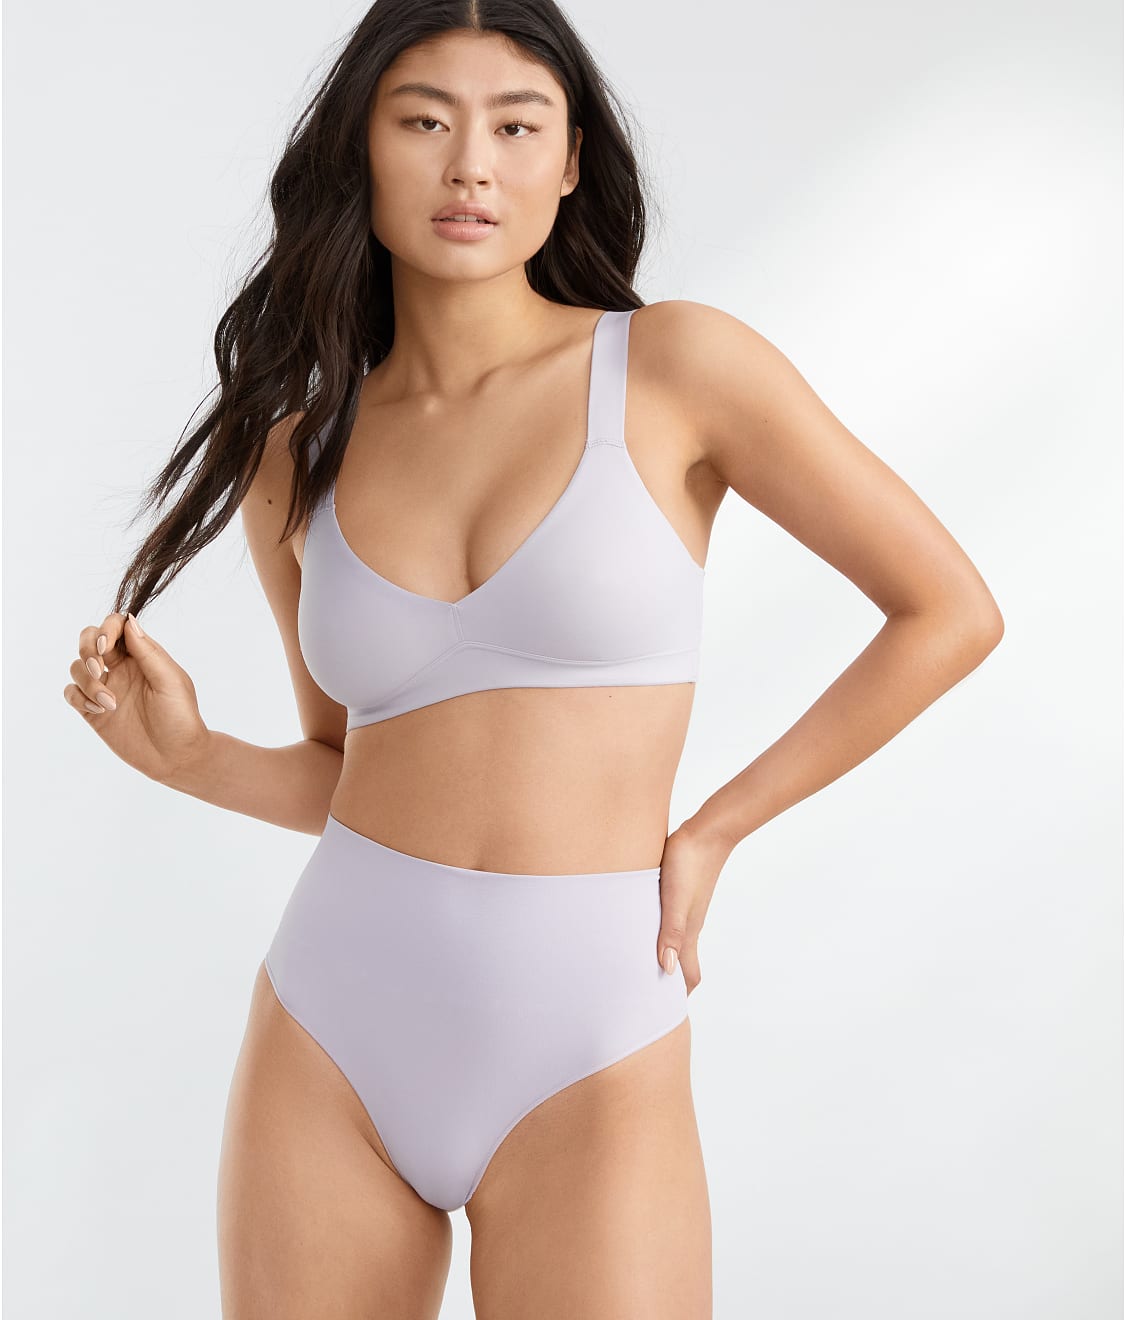 Spanx Ecocare Longline Bralette In Toasted Oatmeal